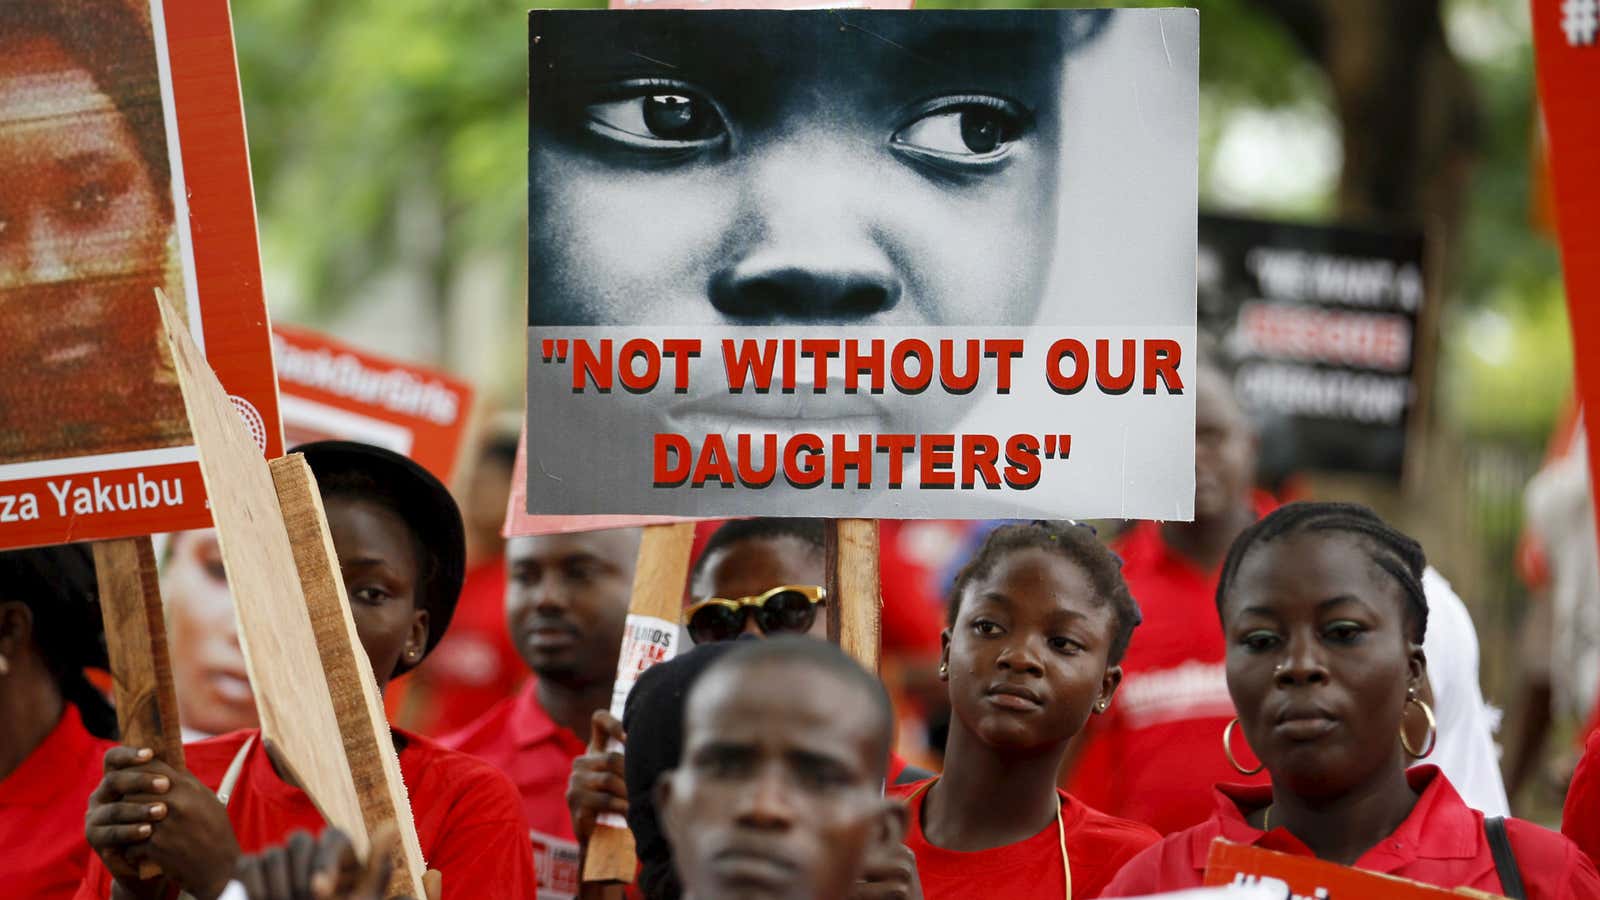 Despite the ‘Bring Back Our Girls’ campaign, Boko Haram has abducted more children in Nigeria.